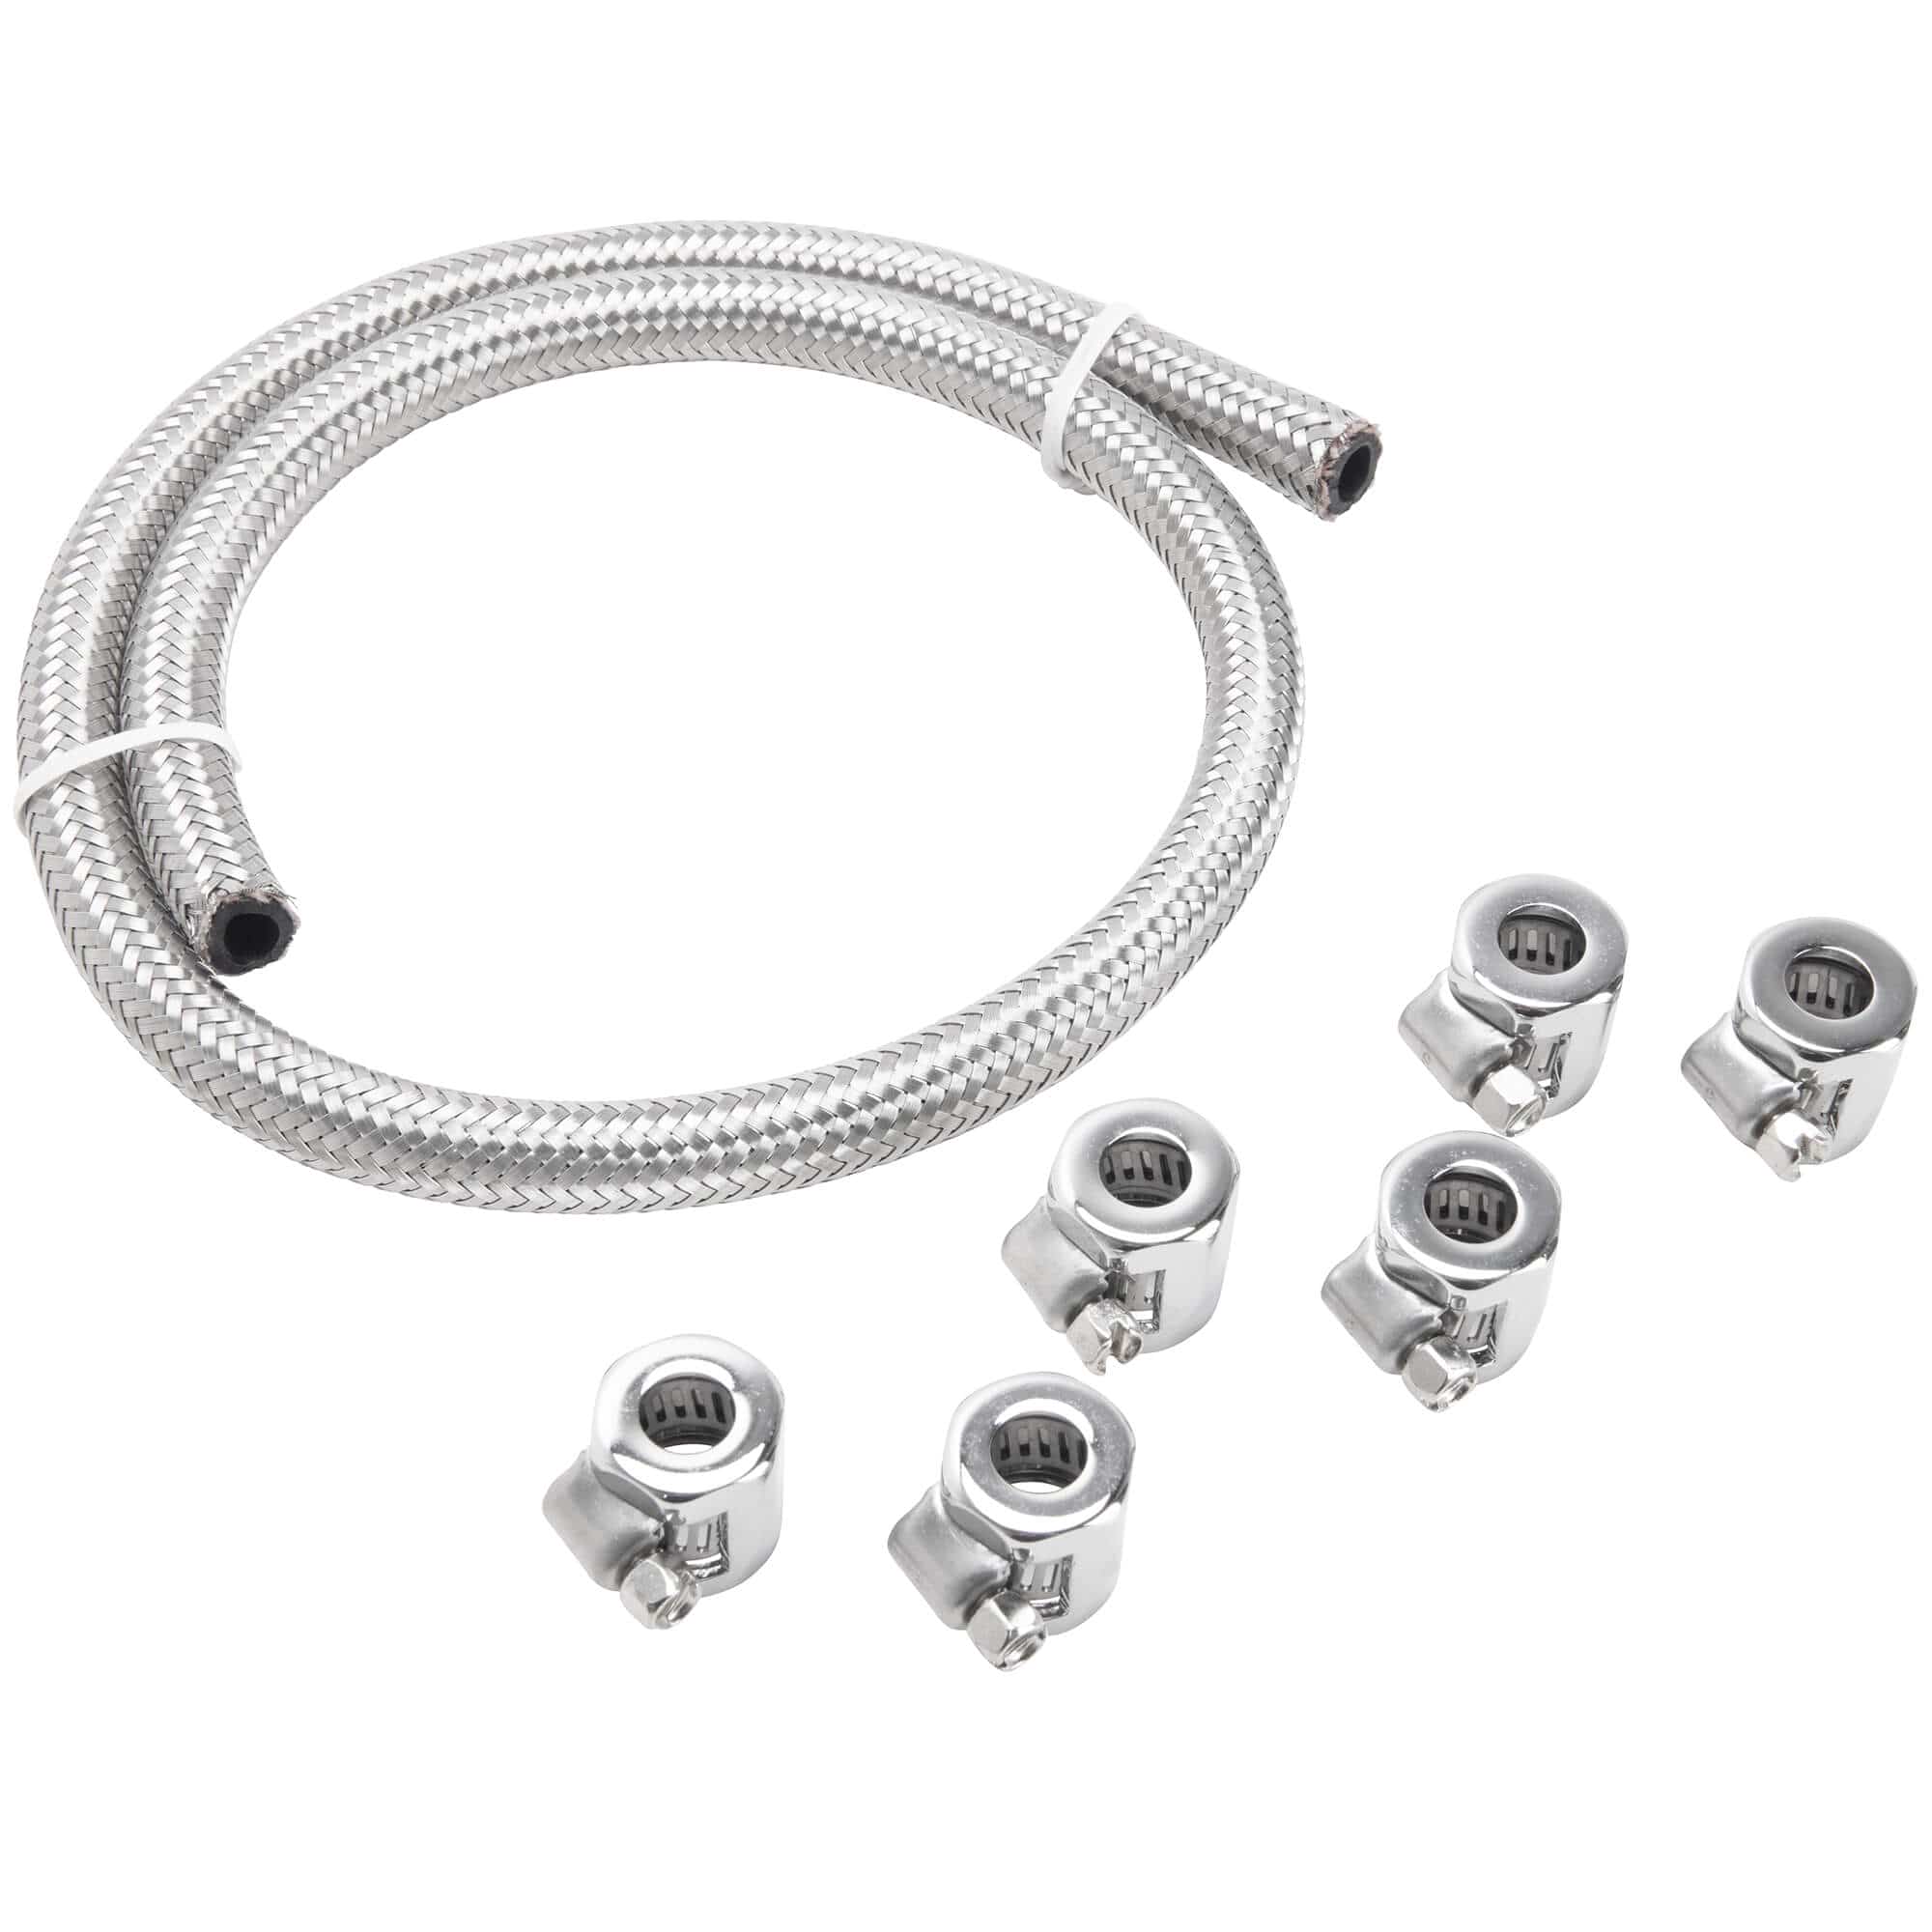 Cycle Standard 5/16 inch Braided Stainless Fuel Line Kit – Lowbrow